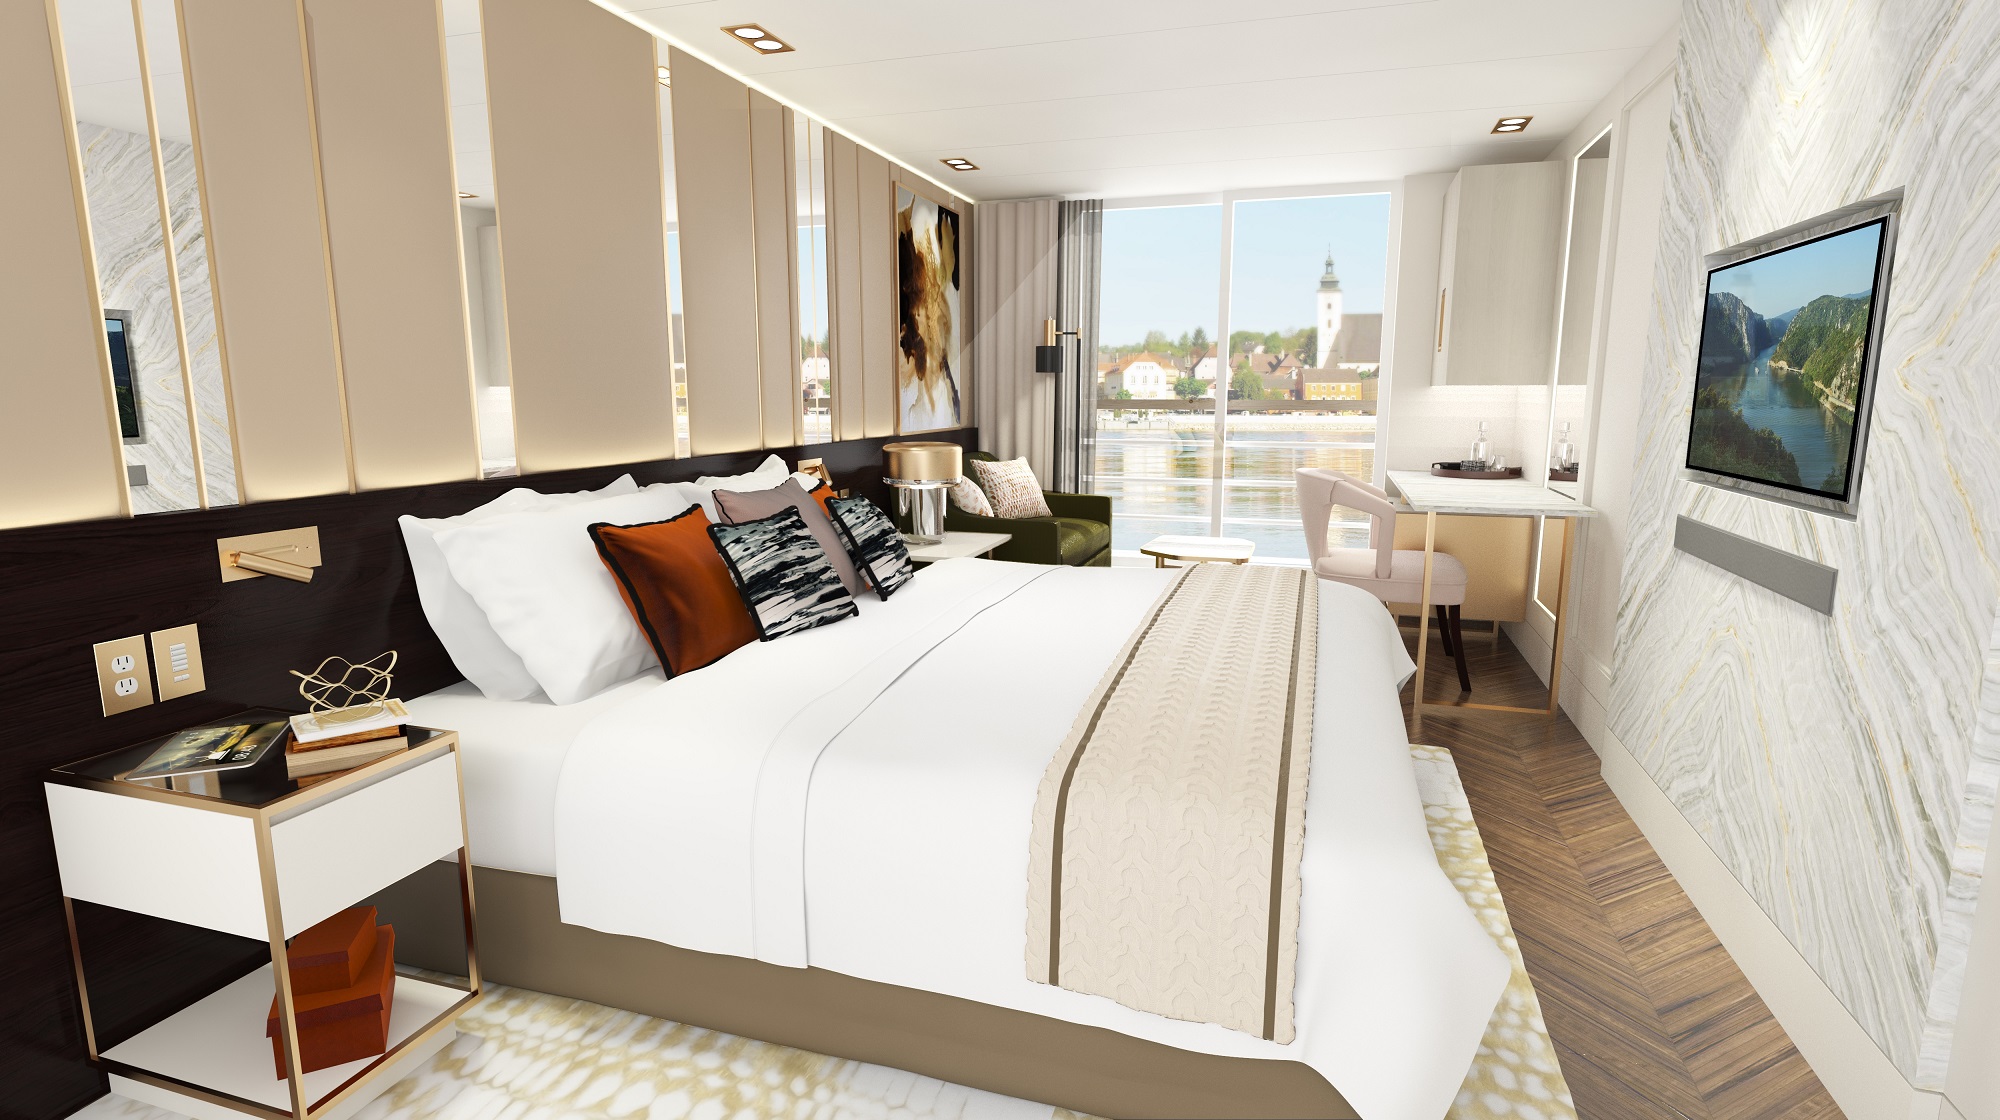 Crystal River Cruises launches brochure for its fleet of five new ships